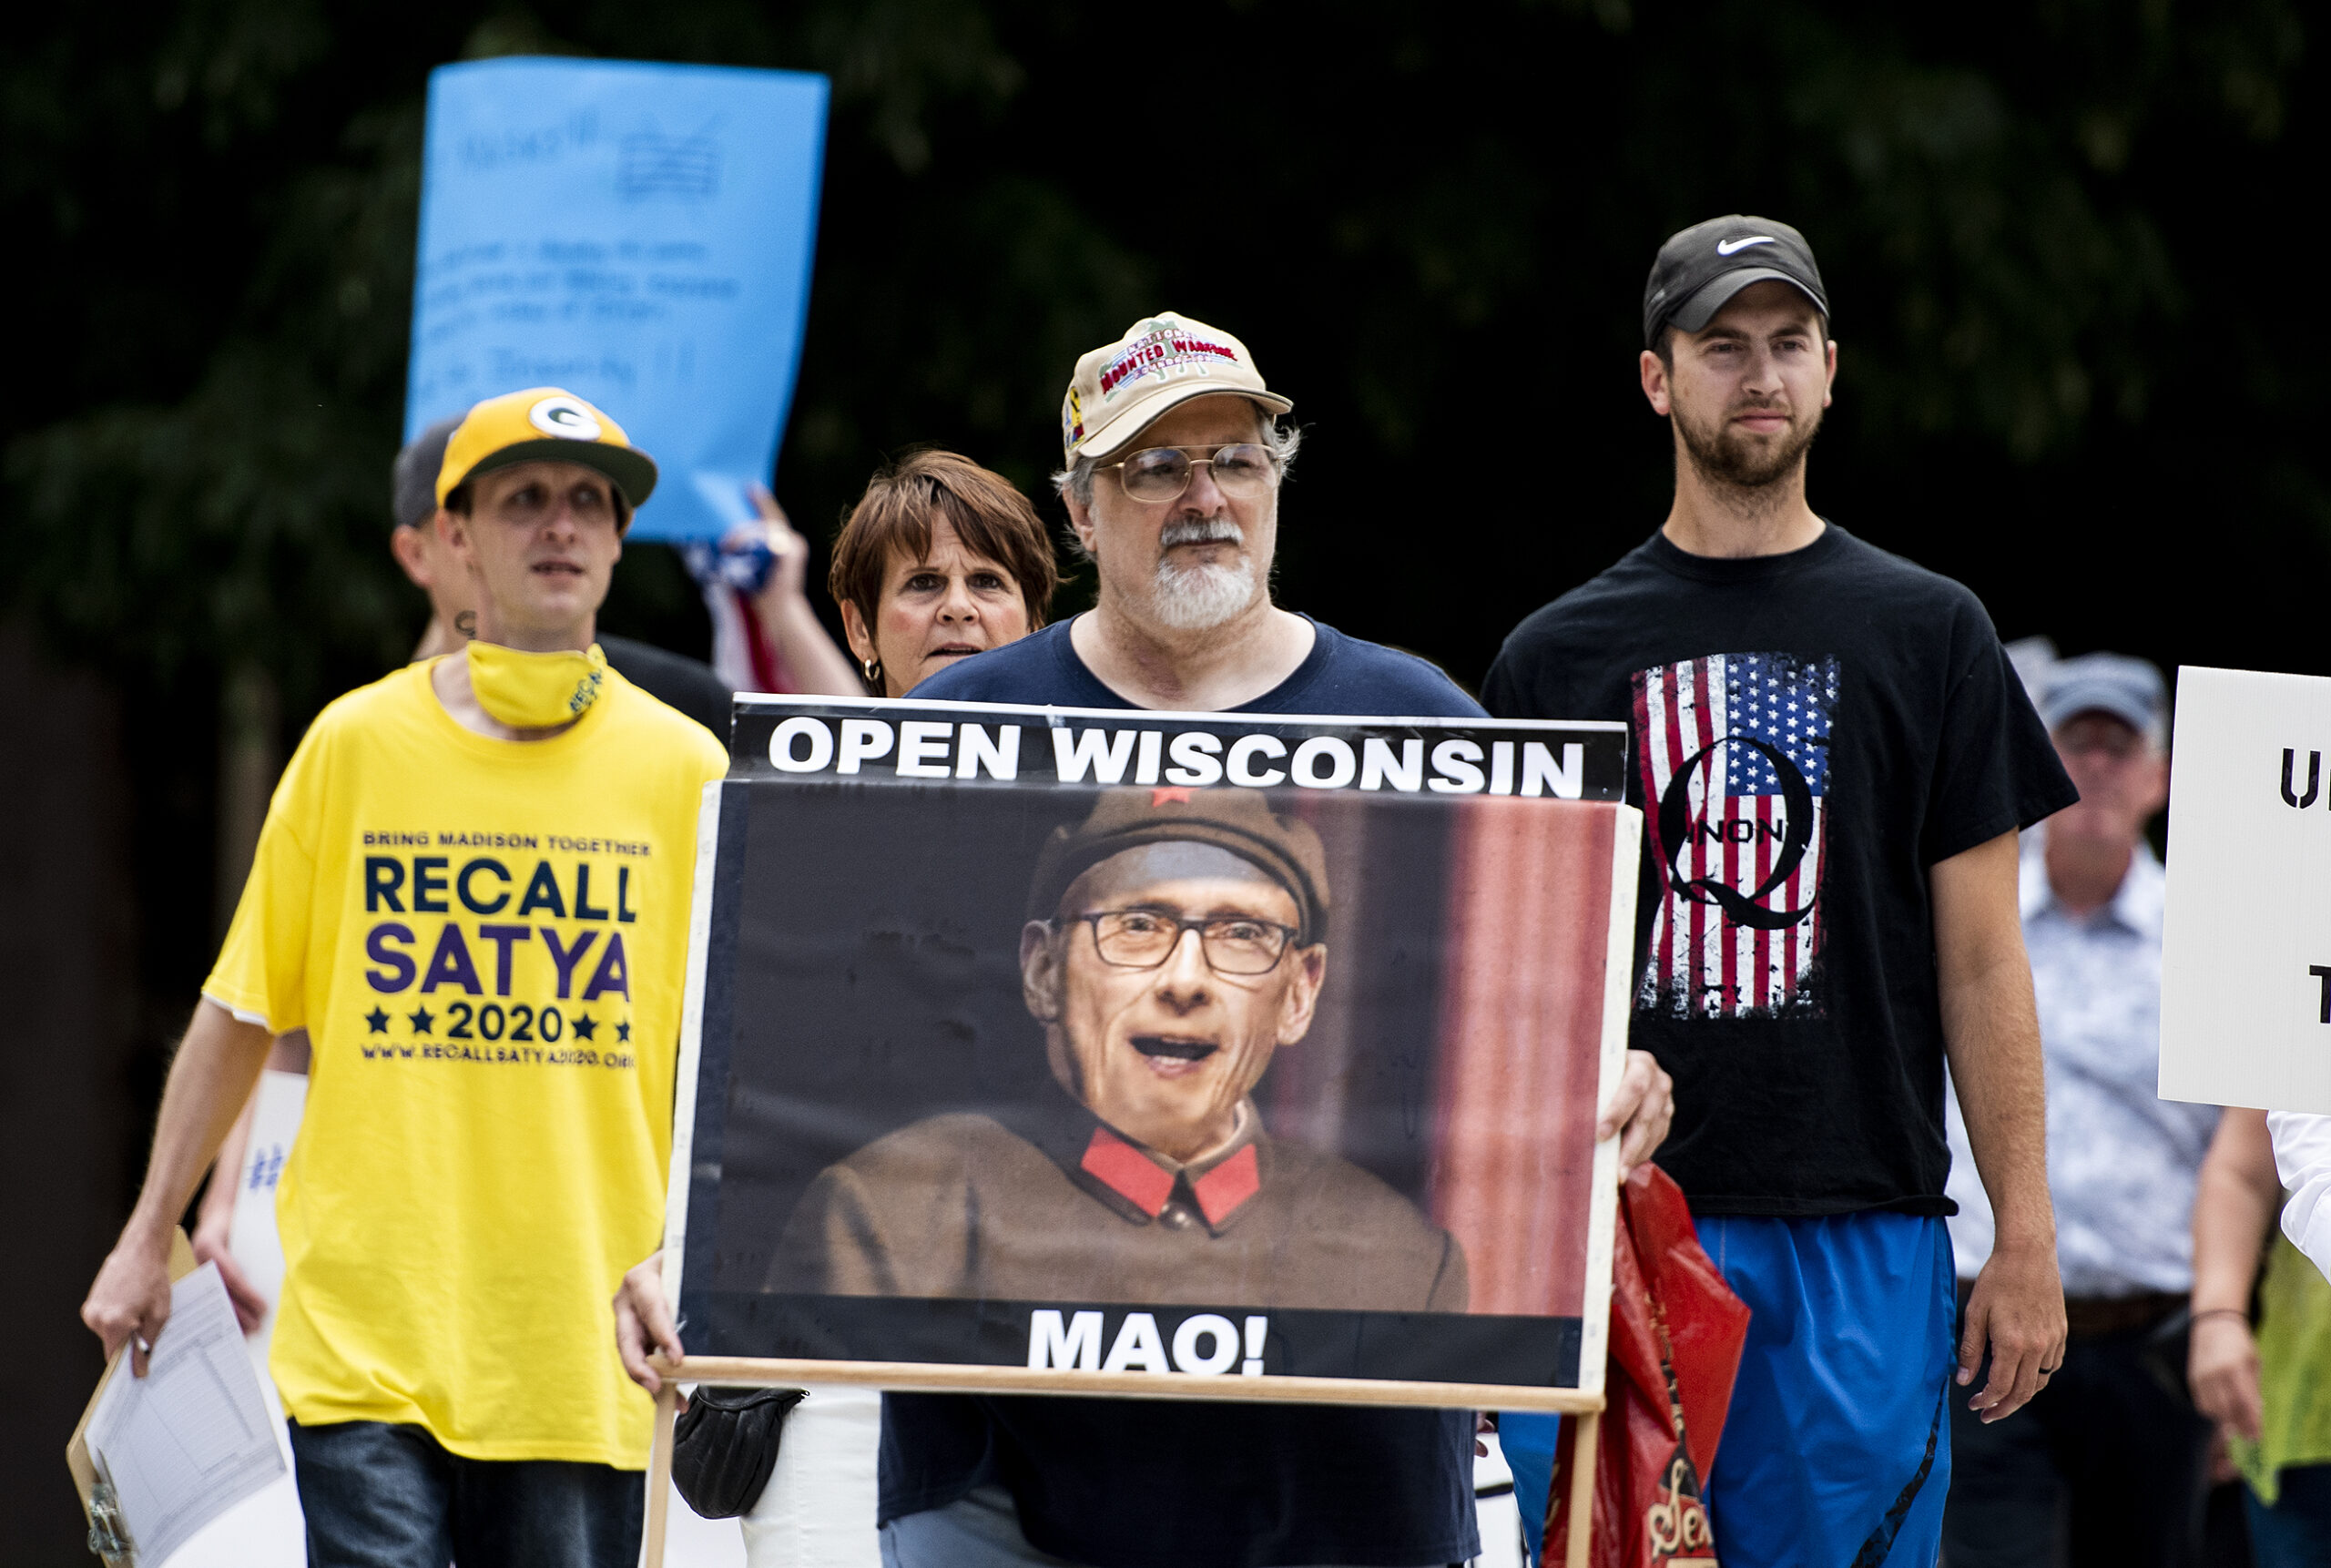 A man holds a sign that compares Gov. Evers to Mao